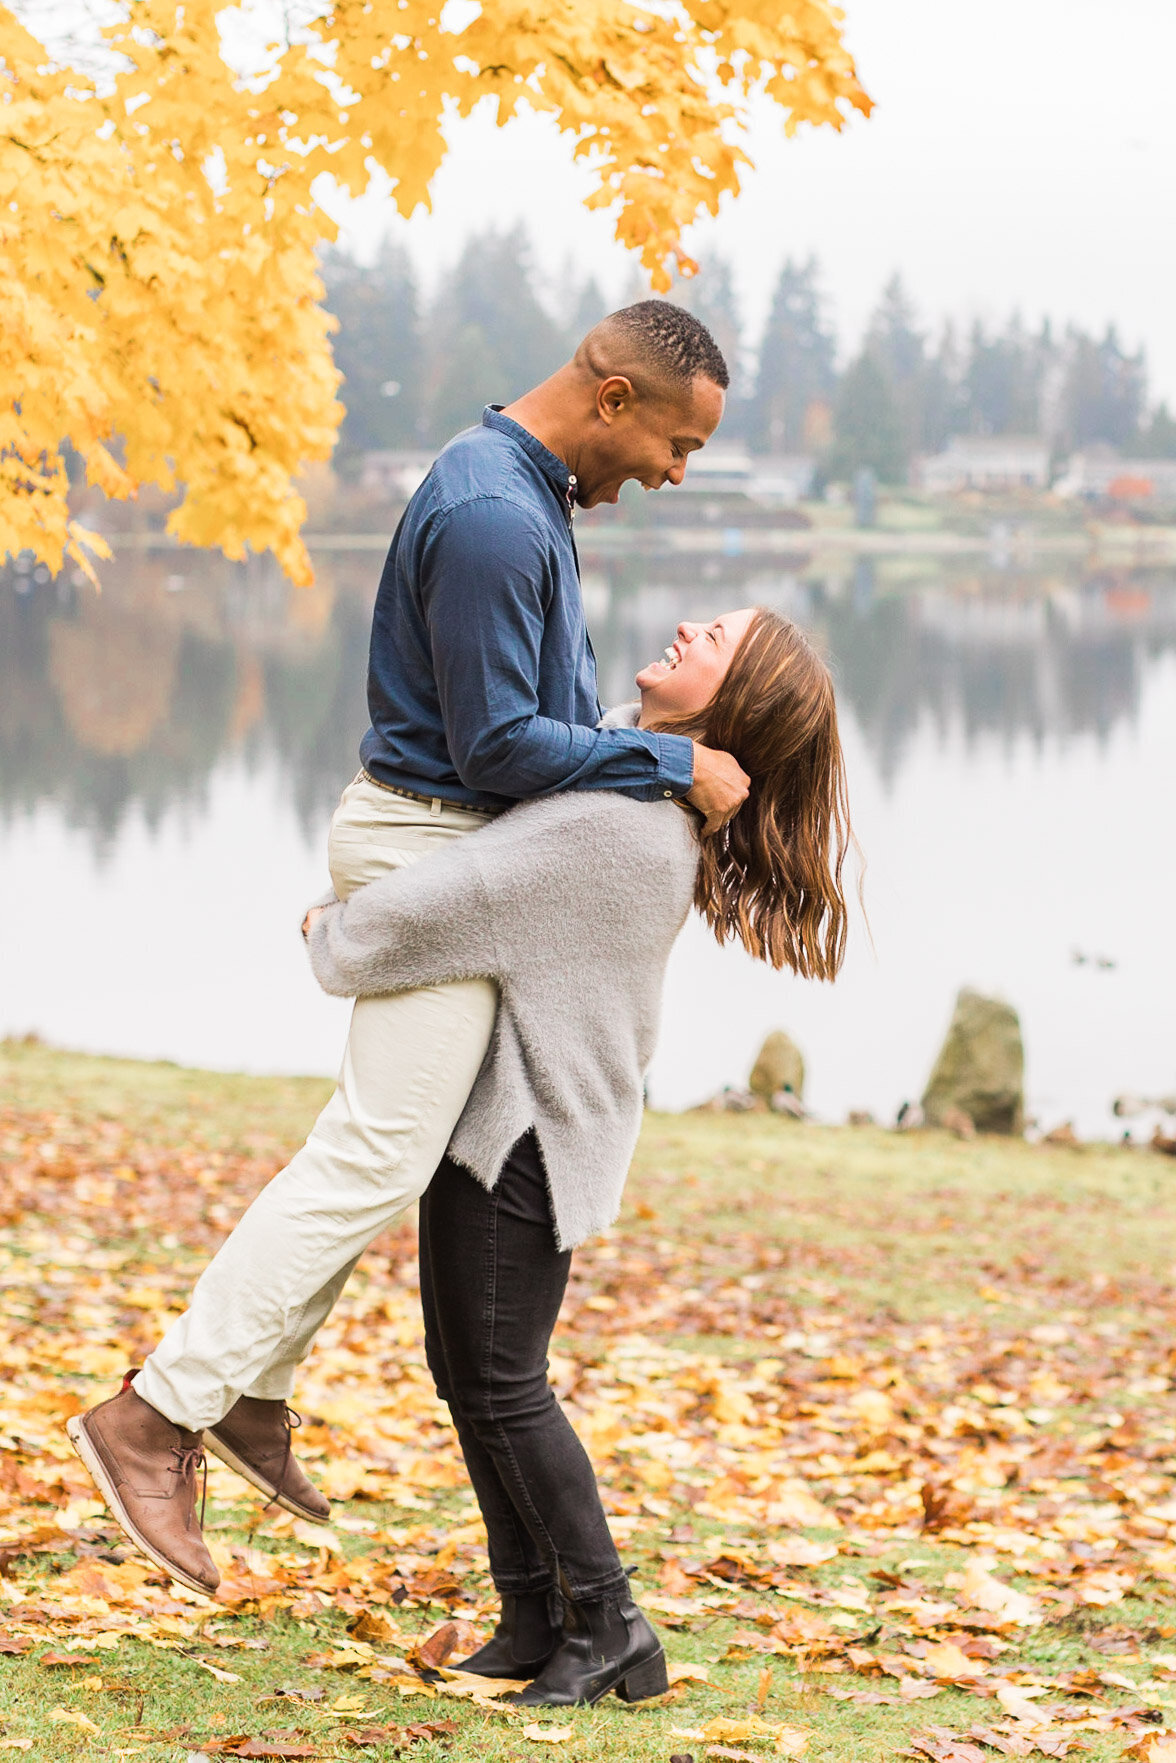 Fun silly fall engagement photos by misty lake with autumn colored trees in Snohomish near Woodinville WA photo by Joanna Monger Photography